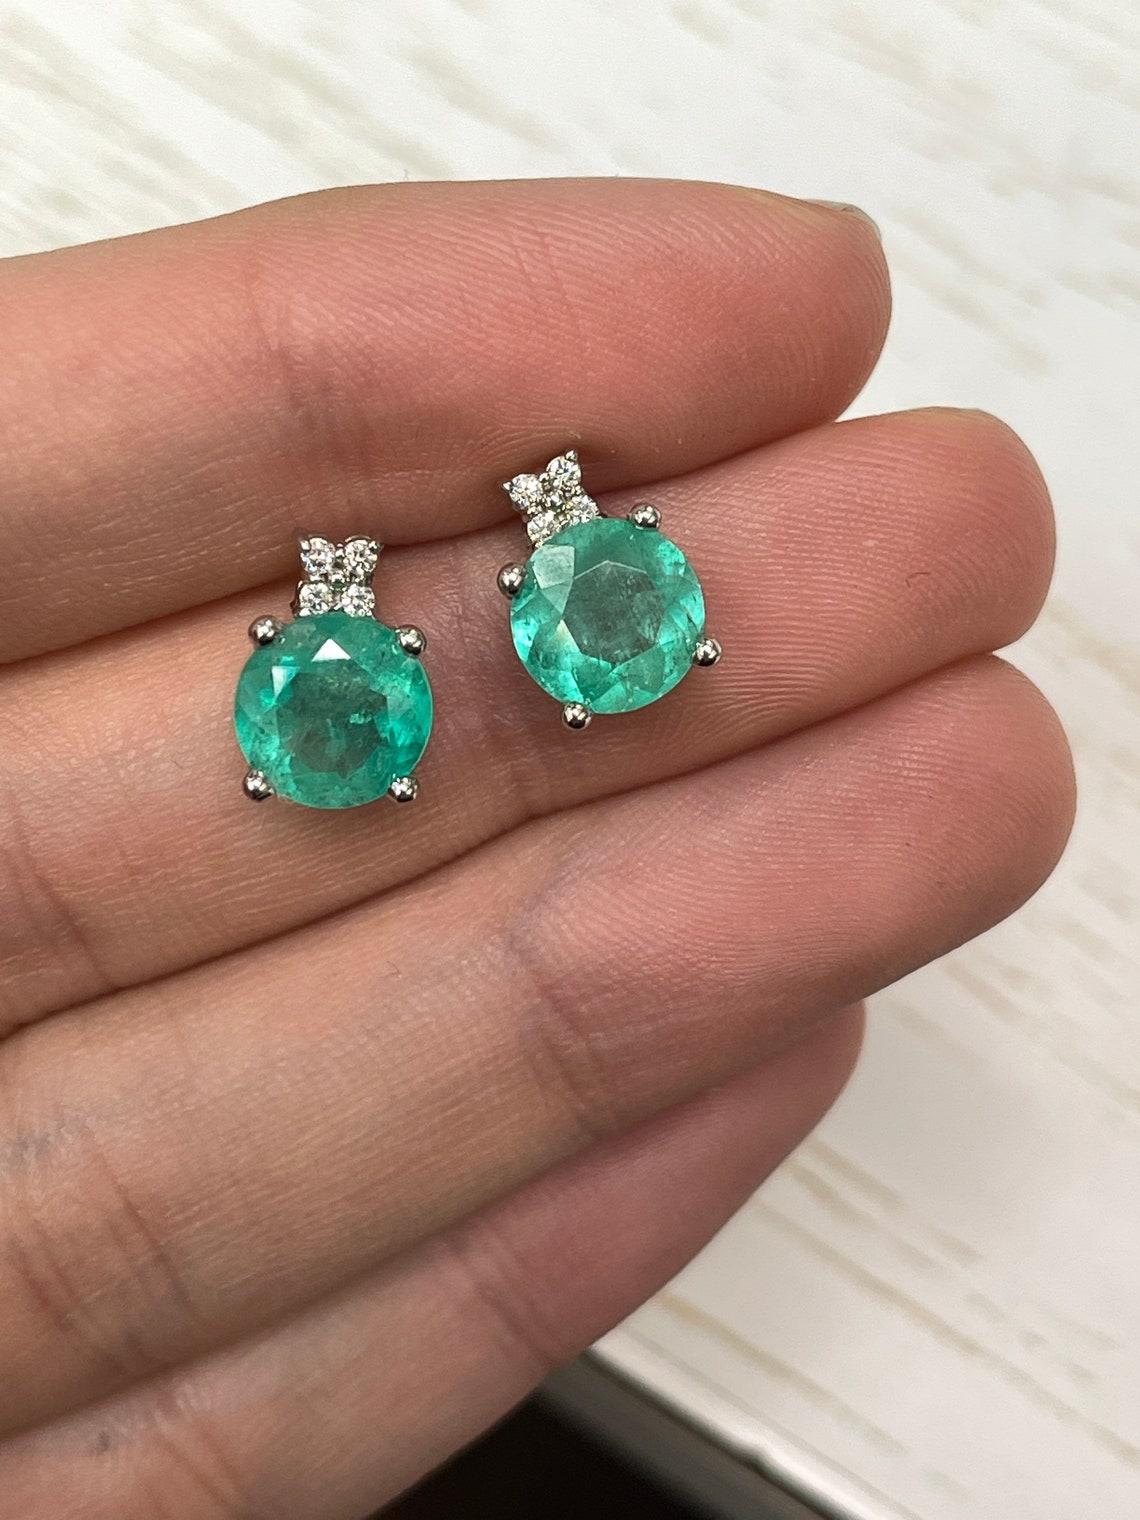 Elegance defined! These beautiful Colombian emerald and diamond earrings are handmade in solid 14k white gold. These studs feature genuine large and rare Colombian emeralds accented with natural white brilliant diamonds. The emeralds have a combined